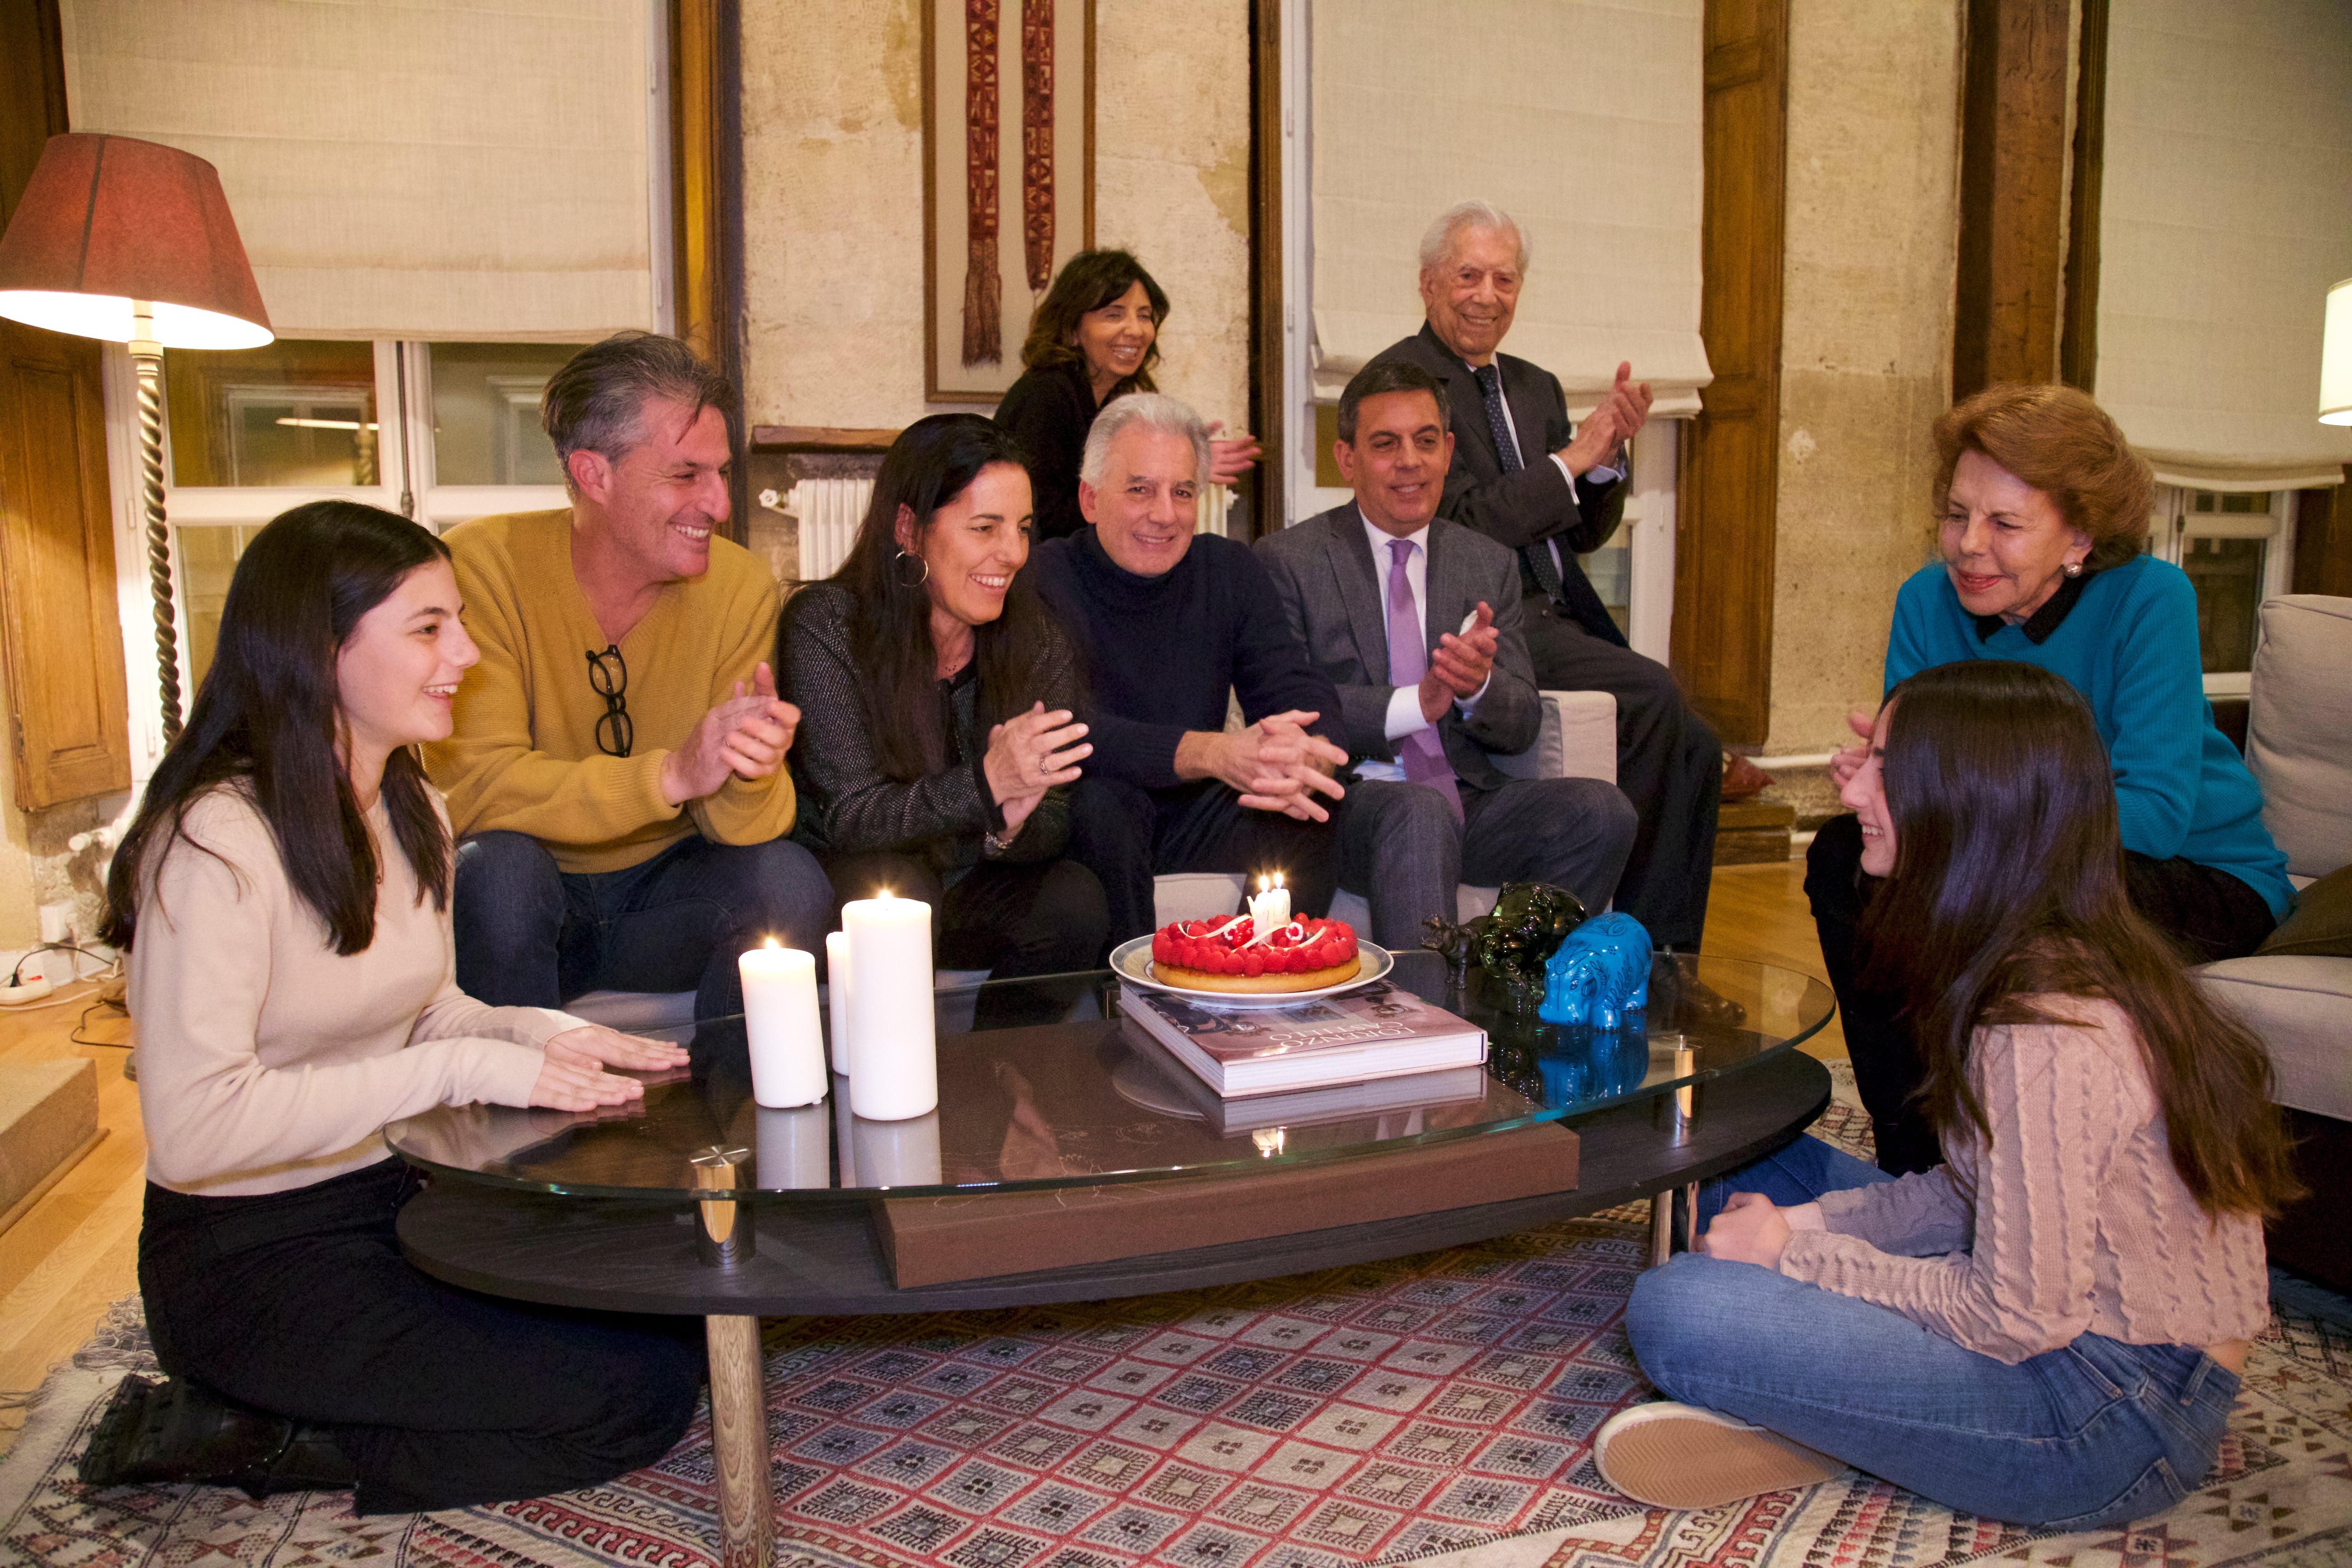 In early February, the Vargas Llosa family gathered at their Paris apartment. From left: Isabella Reich, Stefan Reich, Morgana Vargas Llosa, Álvaro Vargas Llosa, Nada Chedid, Gonzalo Vargas Llosa, Mario, Patricia, and Anaís Reich.